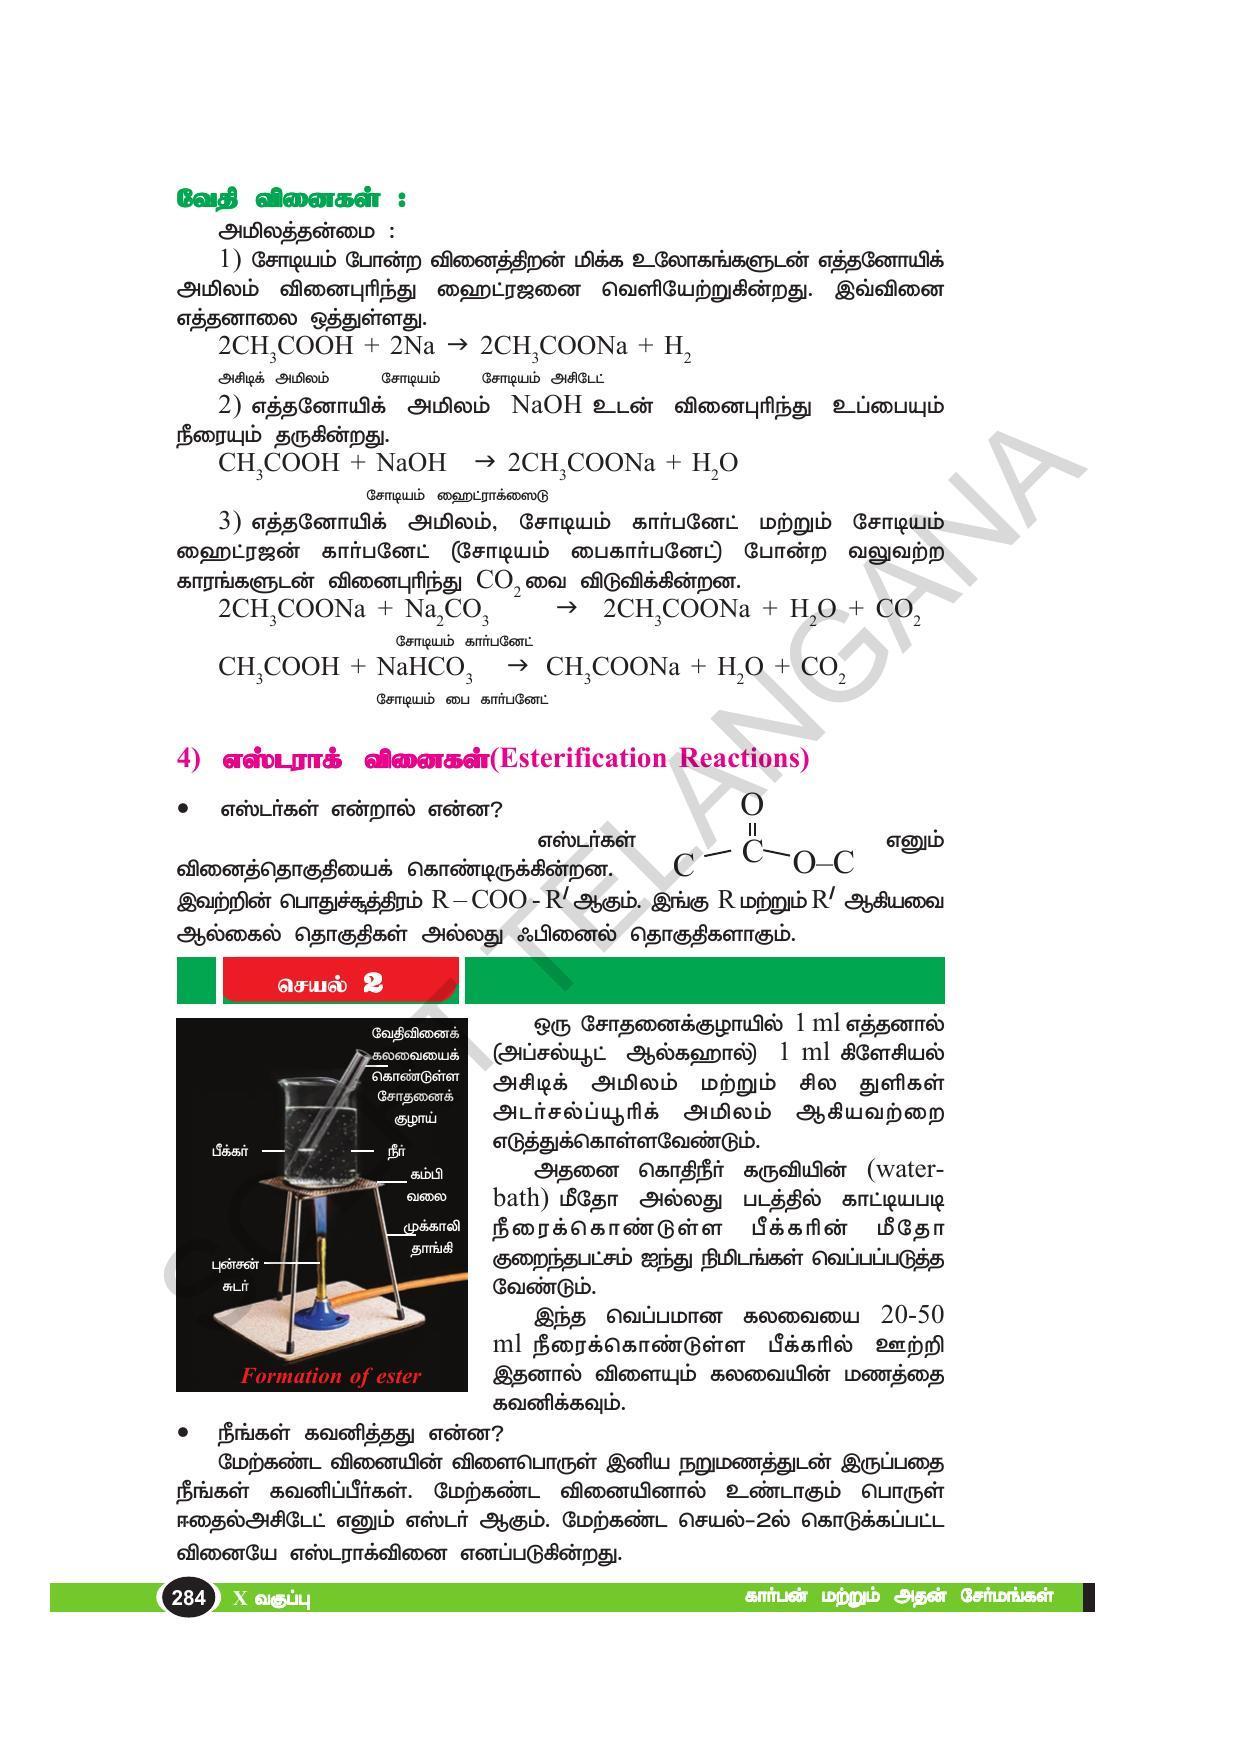 TS SCERT Class 10 Physical Science(Tamil Medium) Text Book - Page 296